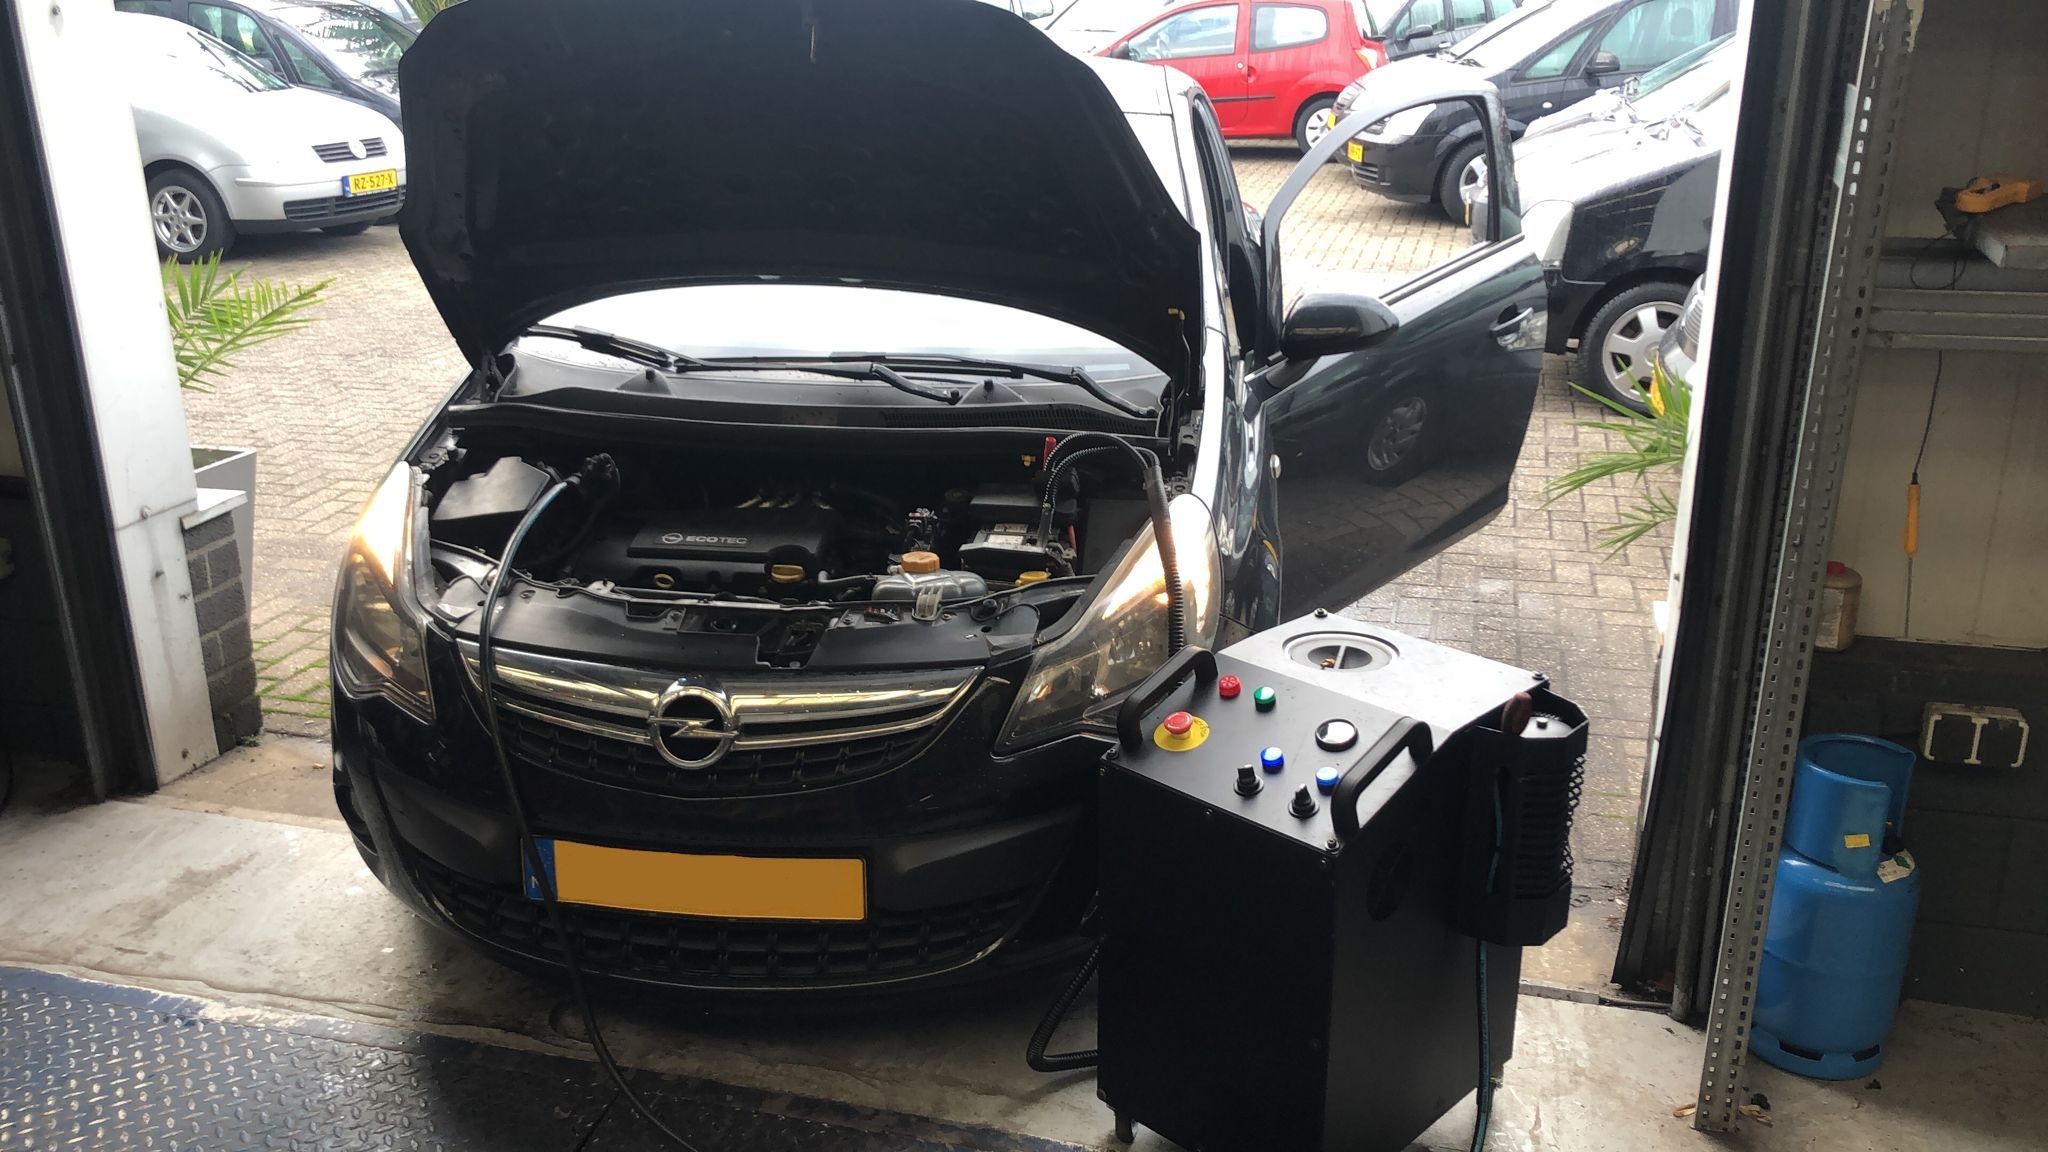 Carbon Cleaning Opel Corsa